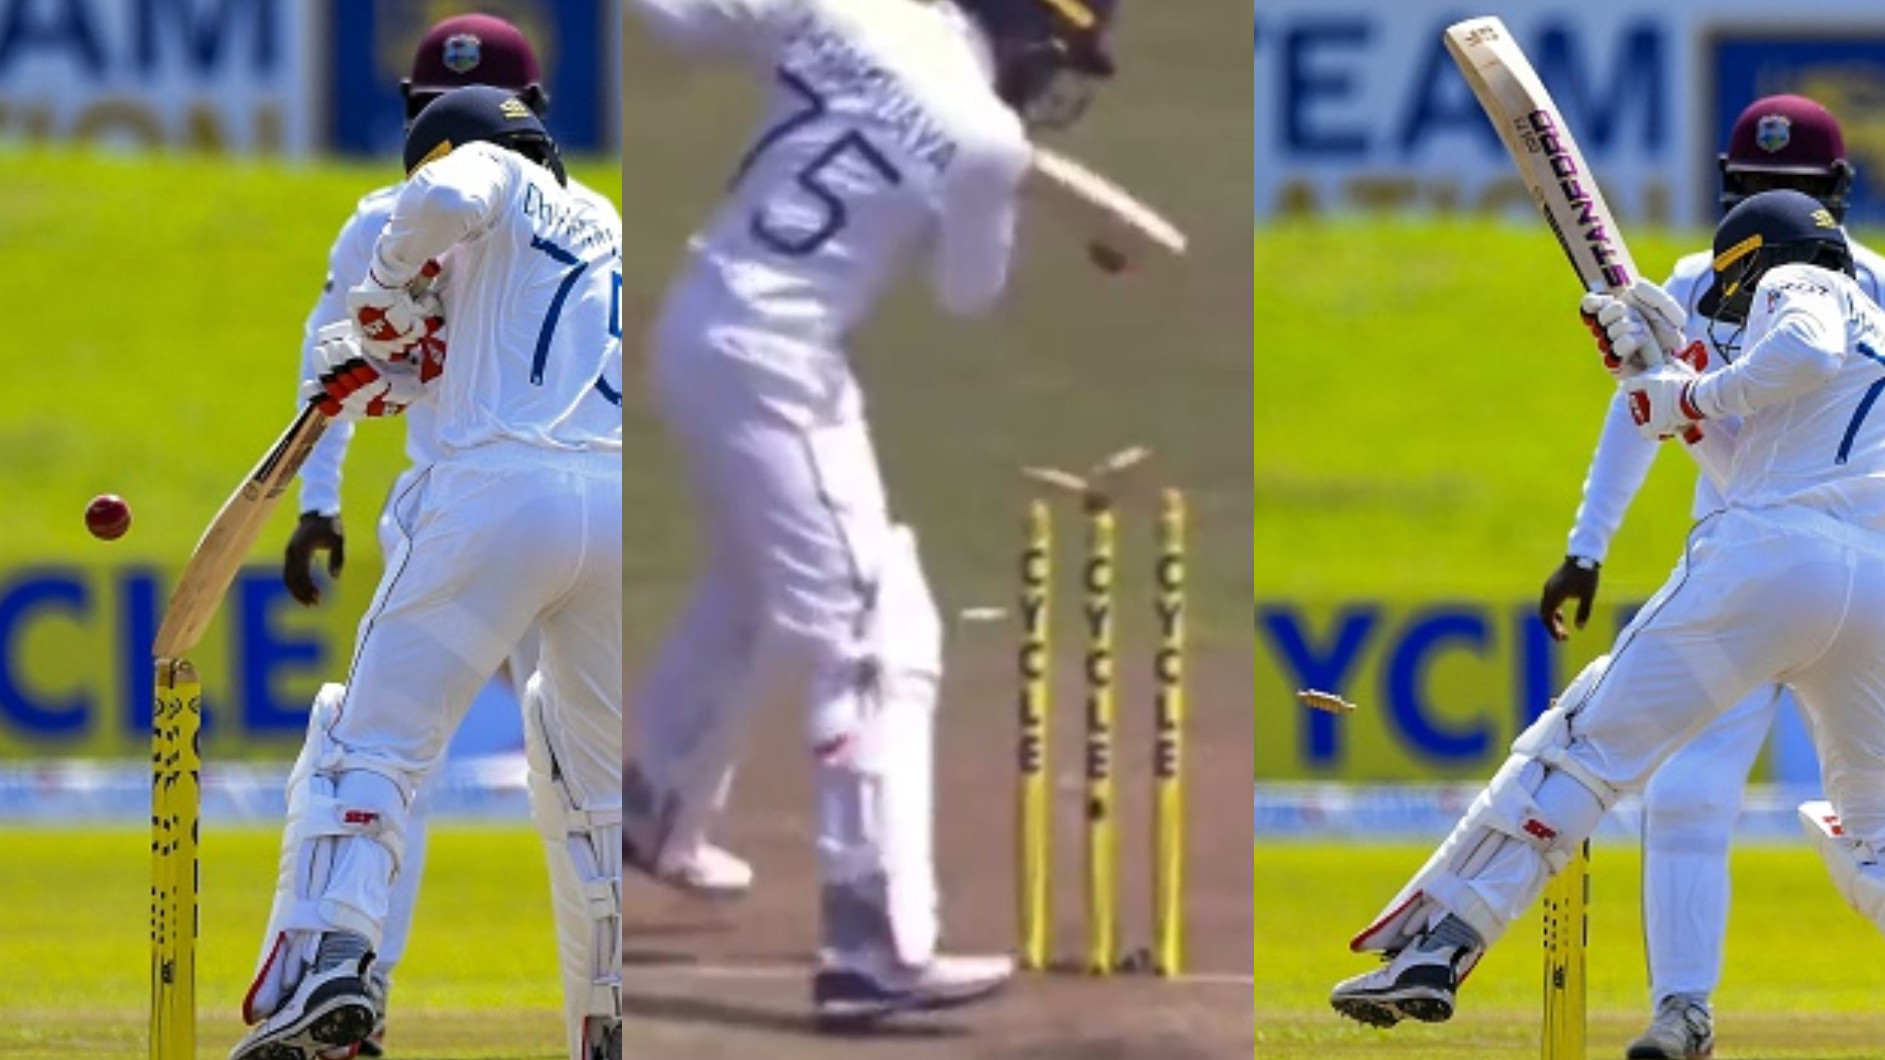 SL v WI 2021: WATCH- Dhananjaya de Silva gets out hit-wicket trying to keep the ball from hitting the stumps